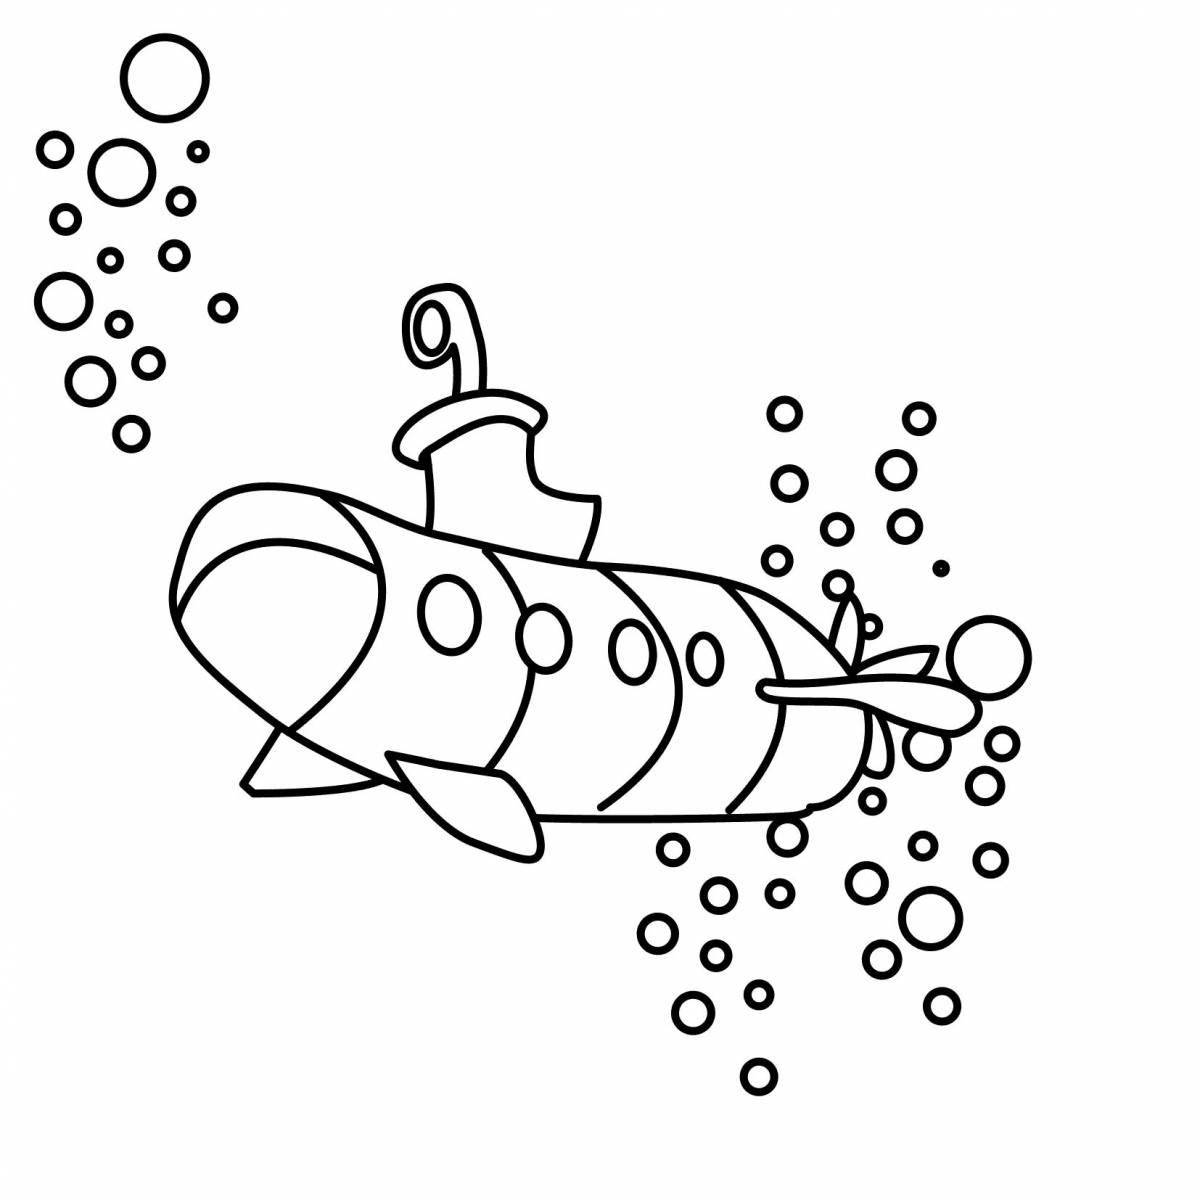 A fun submarine coloring book for kids 5-6 years old